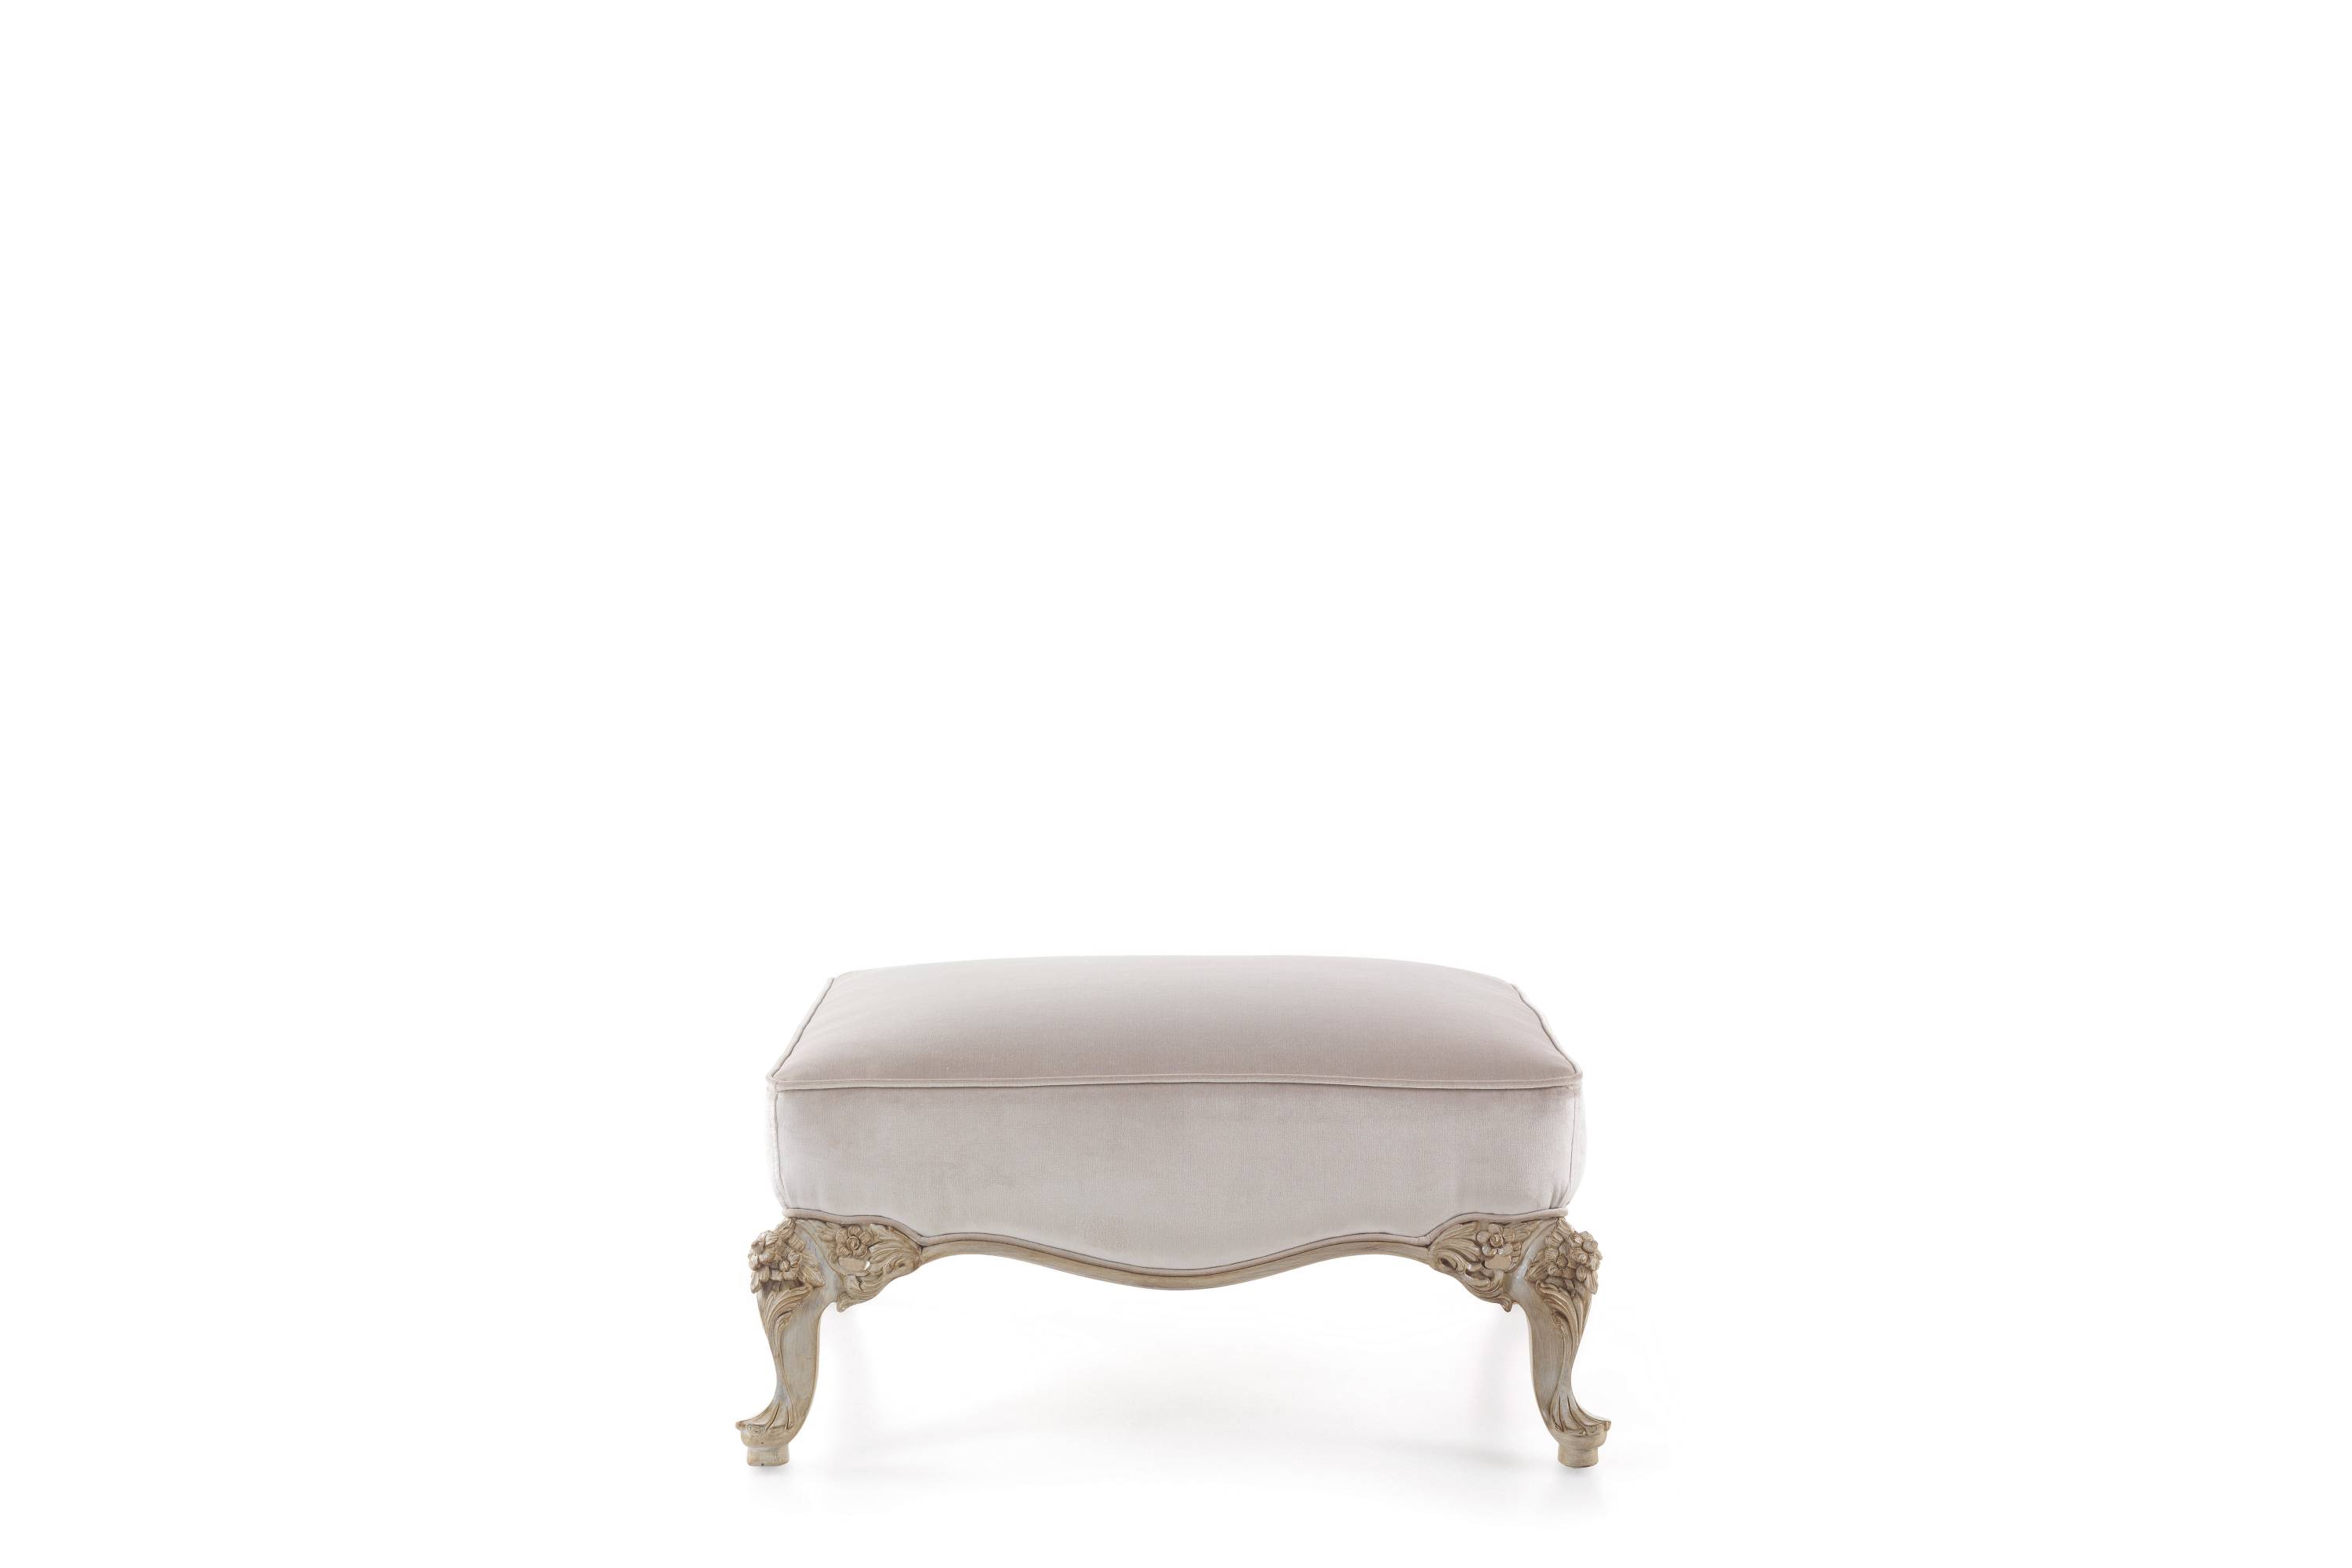 LA GRANDE DAME pouf - Elevate your spaces with Made in Italy luxury classic poufs and benches.